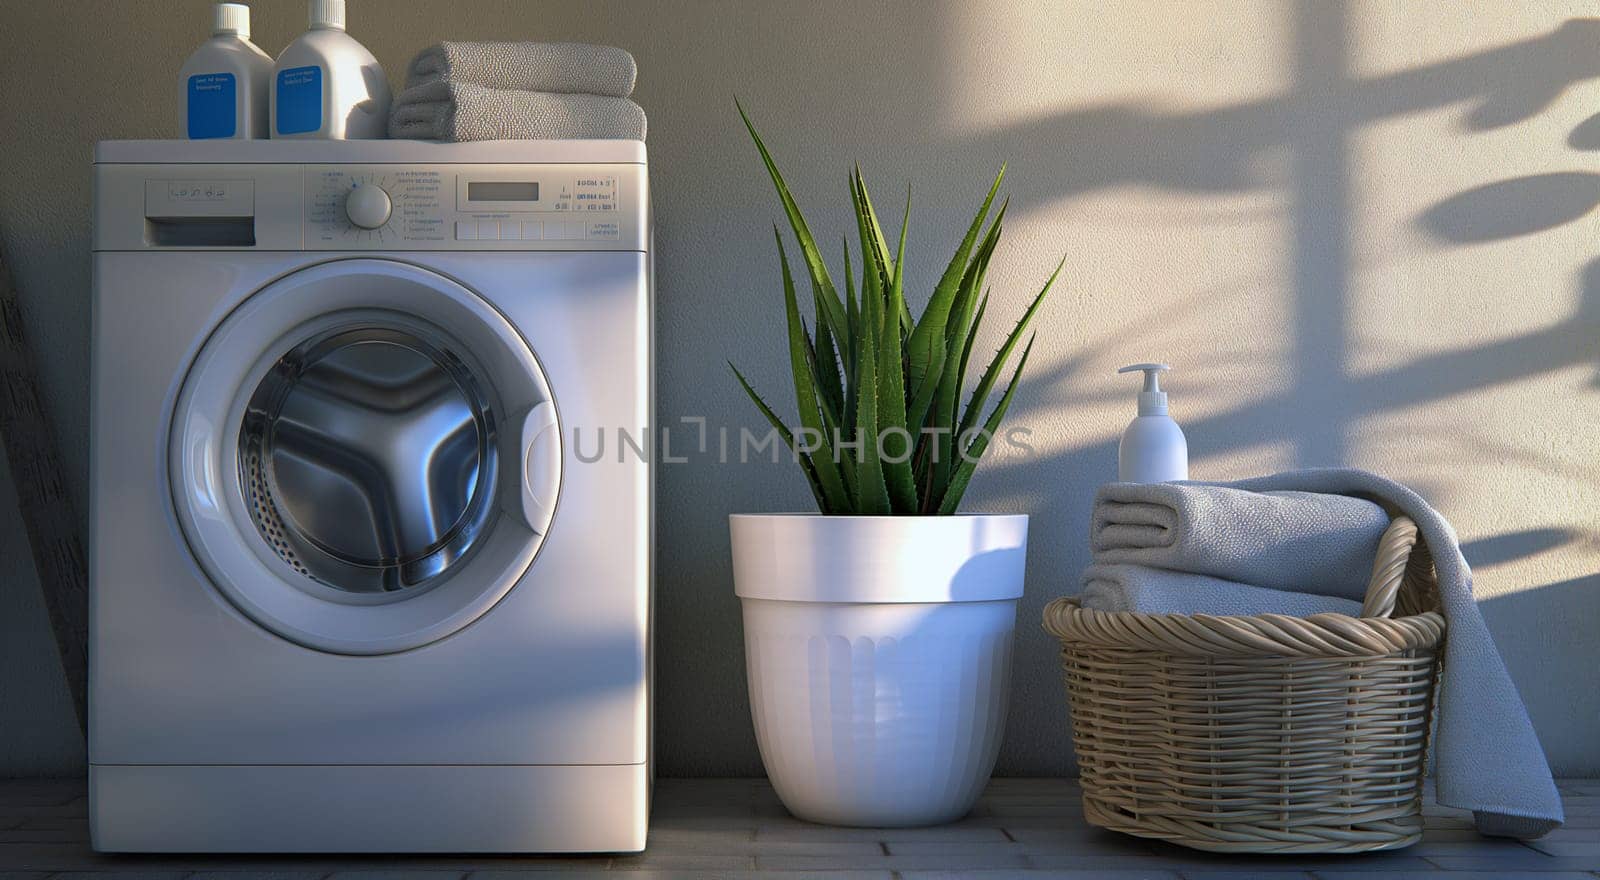 A washing machine, laundry basket, and a plant in a sunny room. by kizuneko